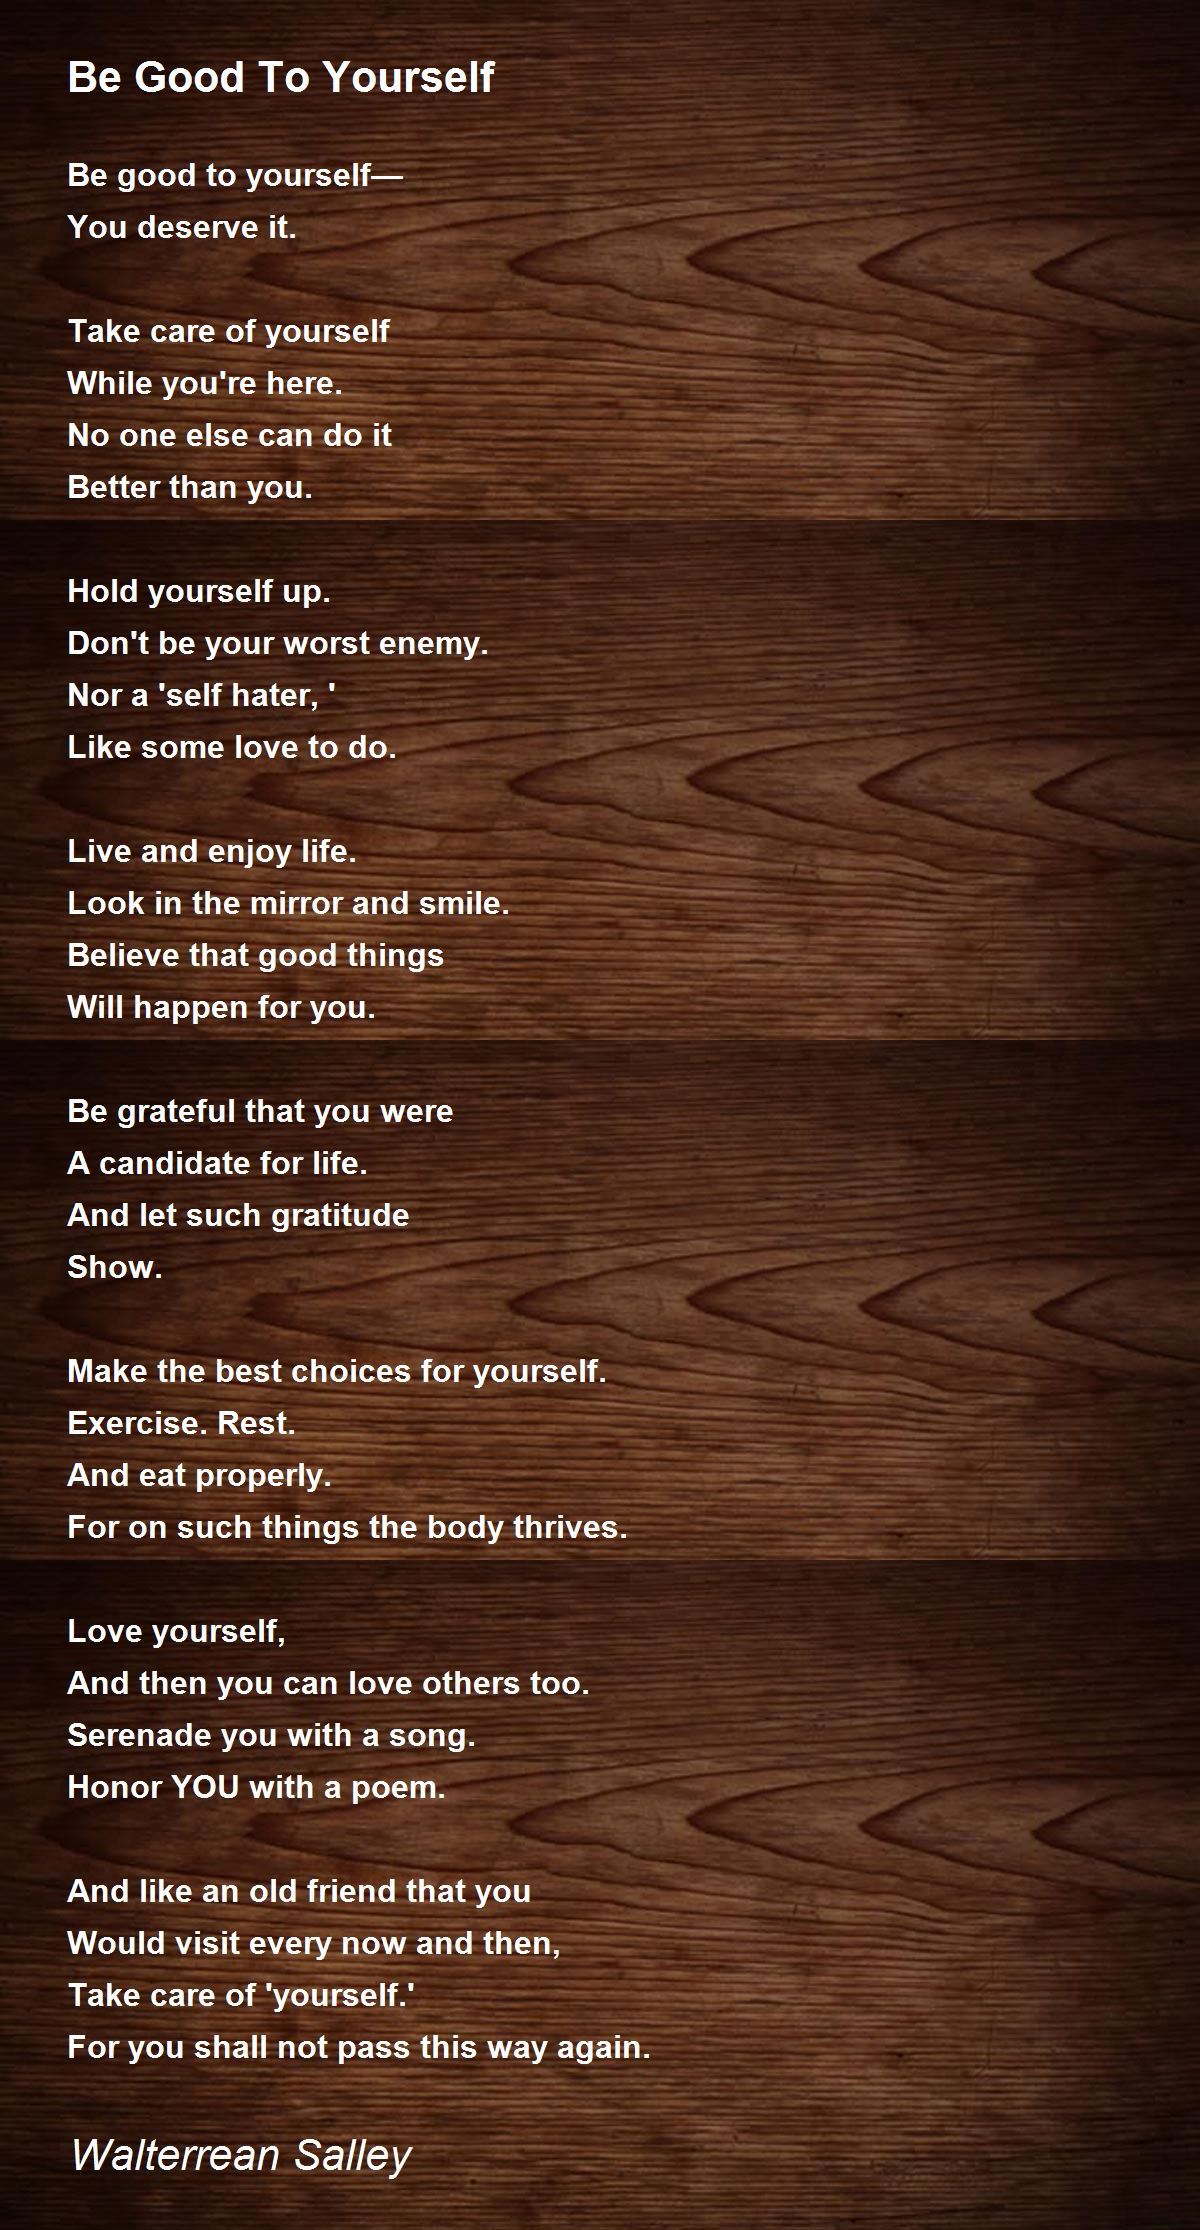 Be Good To Yourself Poem by Walterrean Salley - Poem Hunter